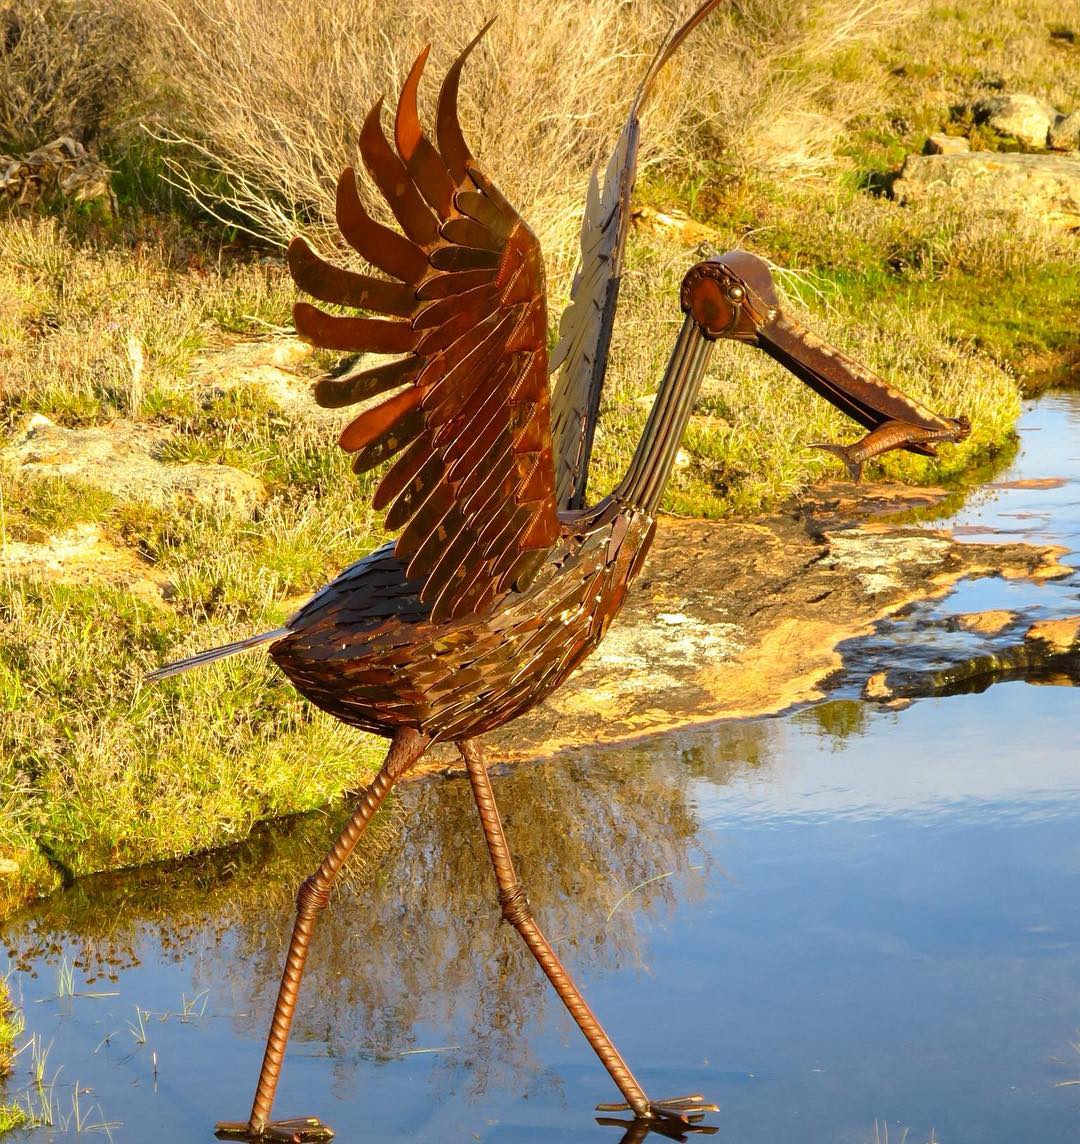 Awesome Recycled Scrap Sculptures by Jordan Sprigg - Digital Art Mix